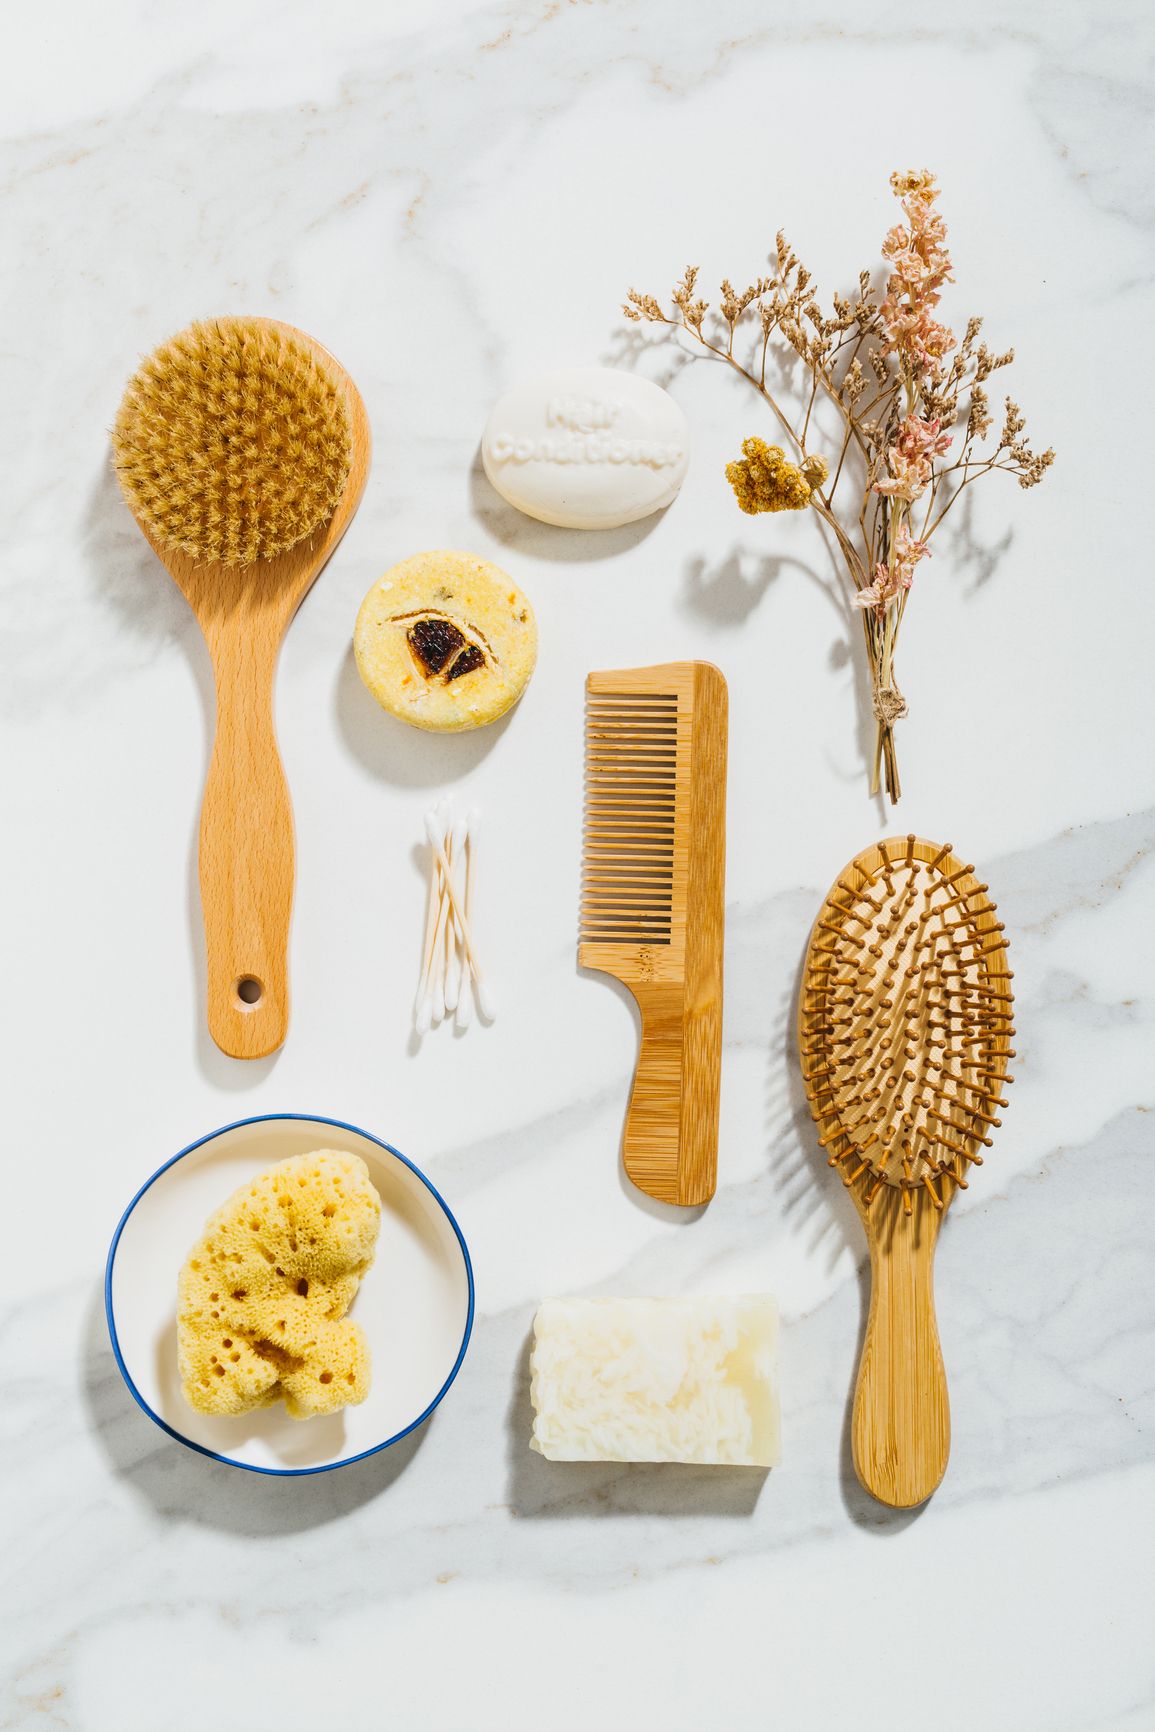 Why You Need to Clean Your Hairbrush